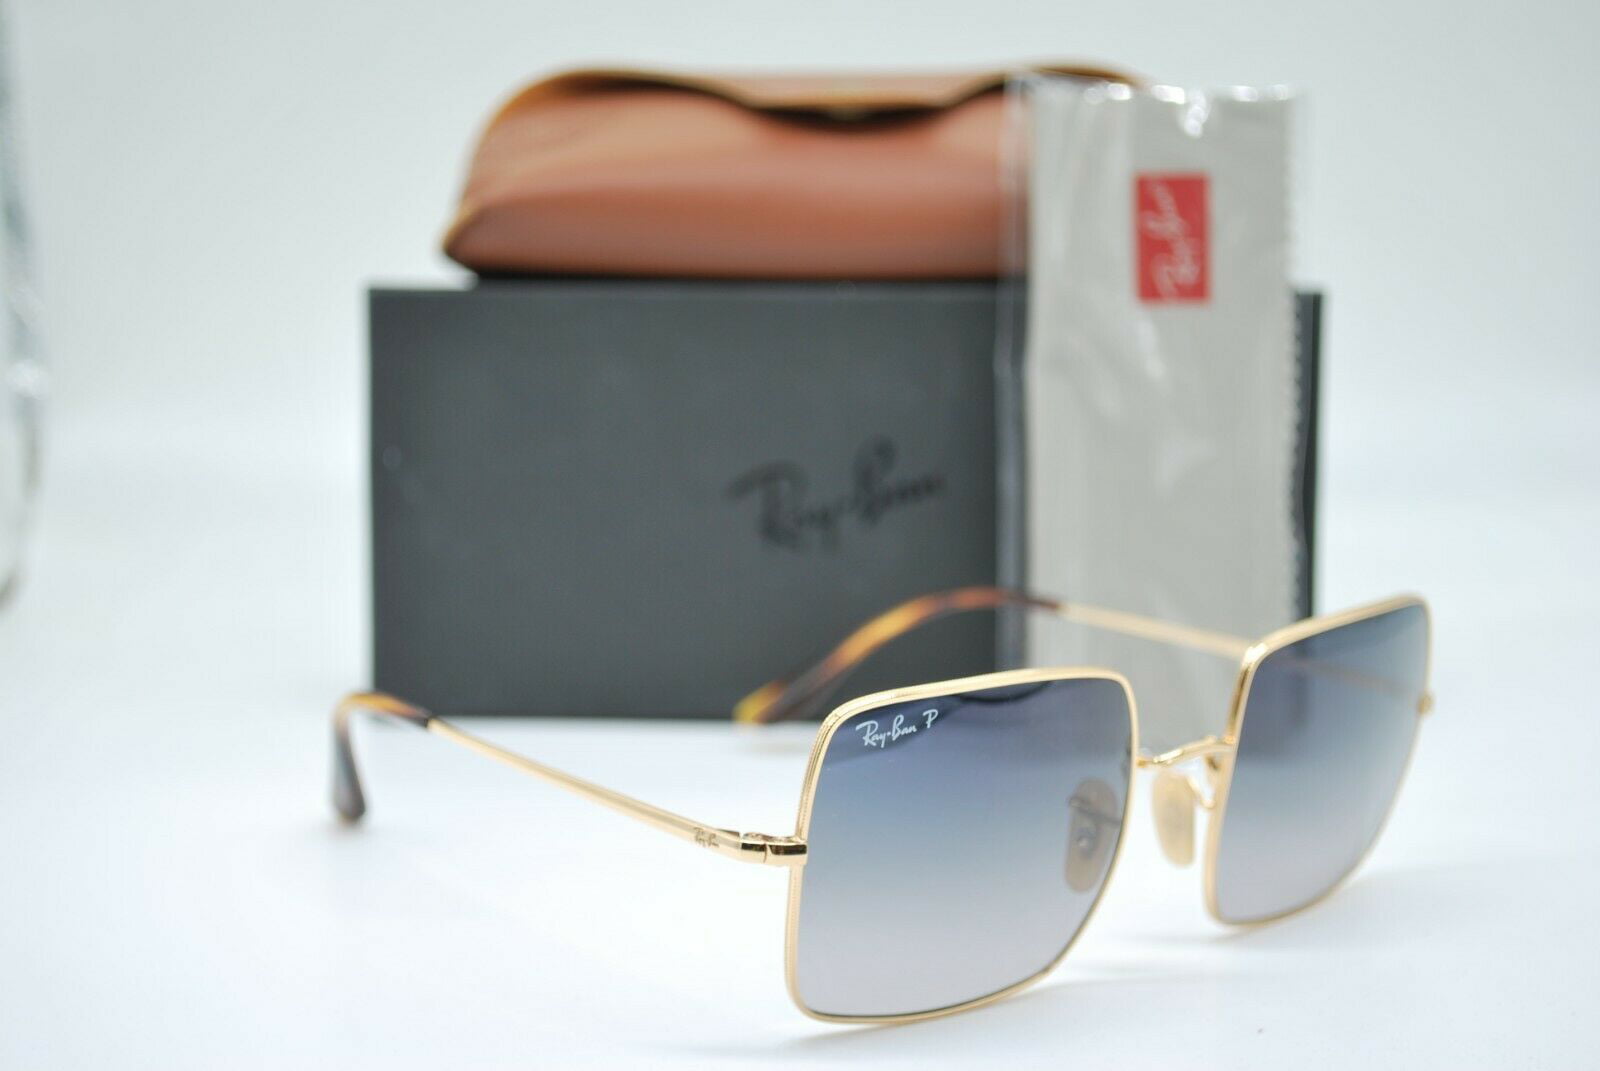 NEW RAY-BAN RB 1971 9147/78 ARISTA POLARIZED AUTHENTIC FRAME SUNGLASSES ...